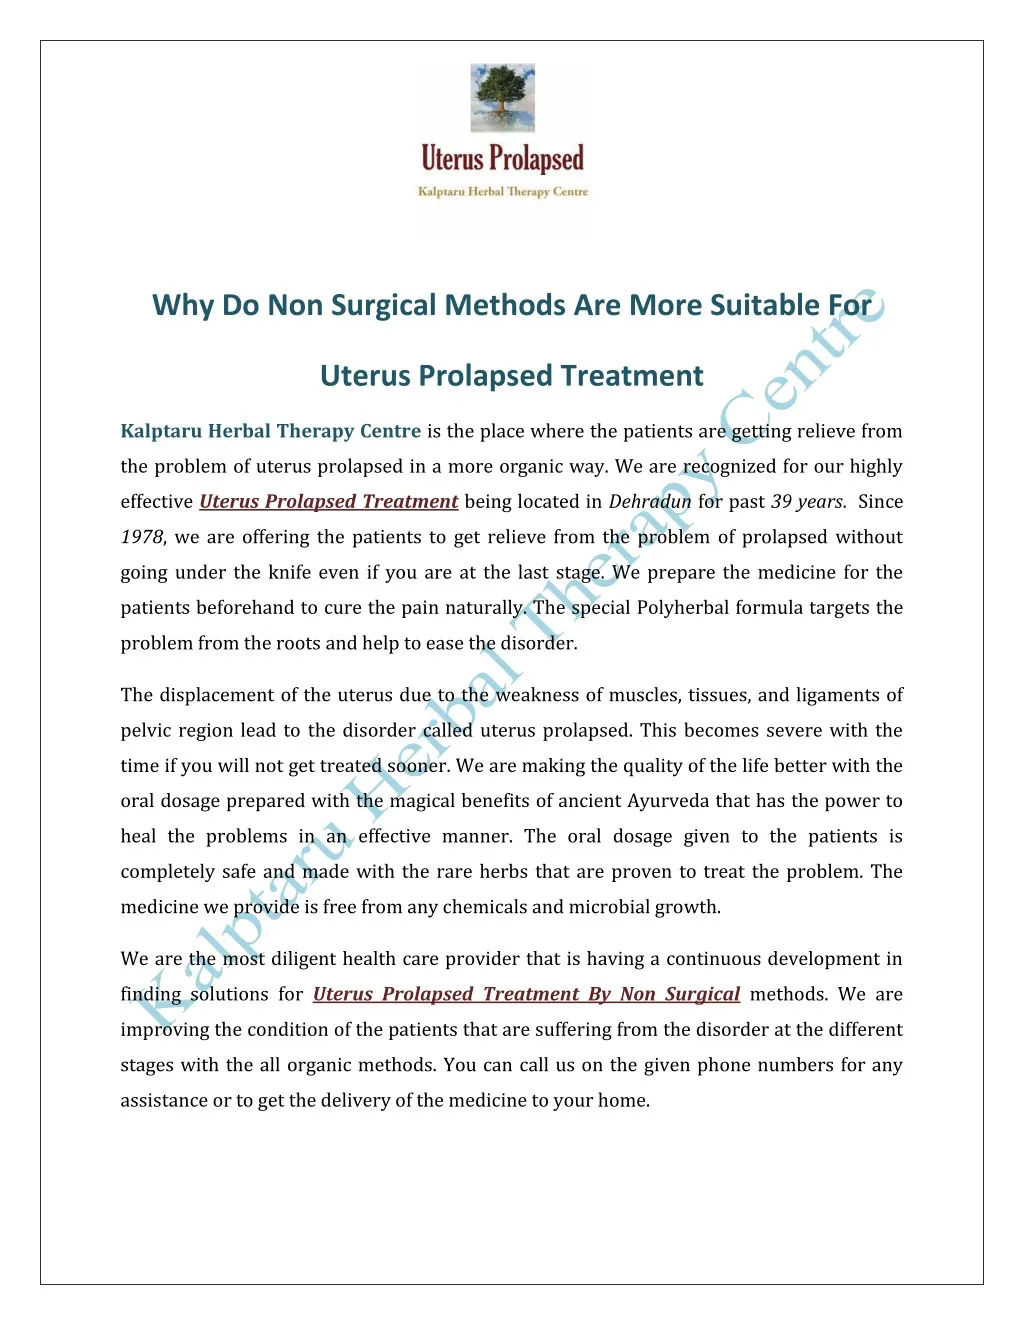 Why Do Non Surgical Methods Are More Suitable For Uterus Prolapsed Treatment